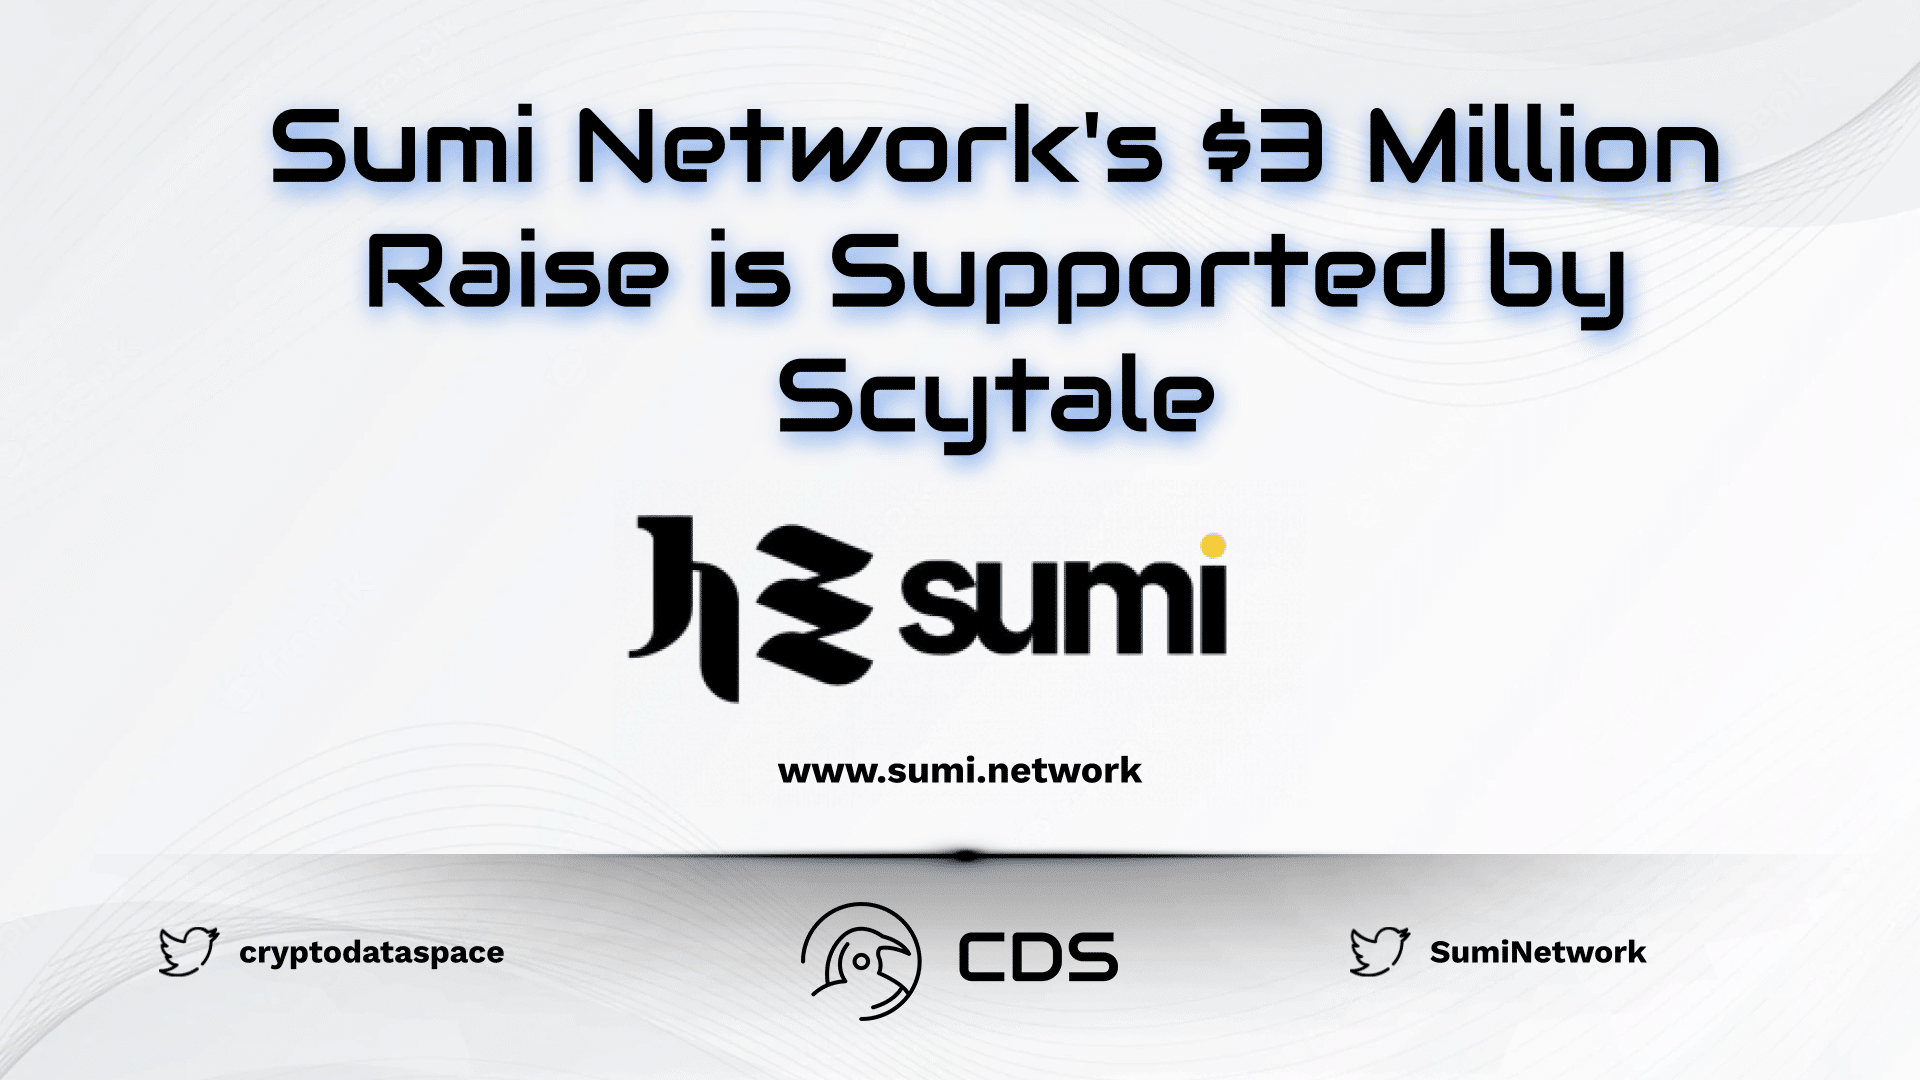 Sumi Network's $3 Million Raise is Supported by Scytale